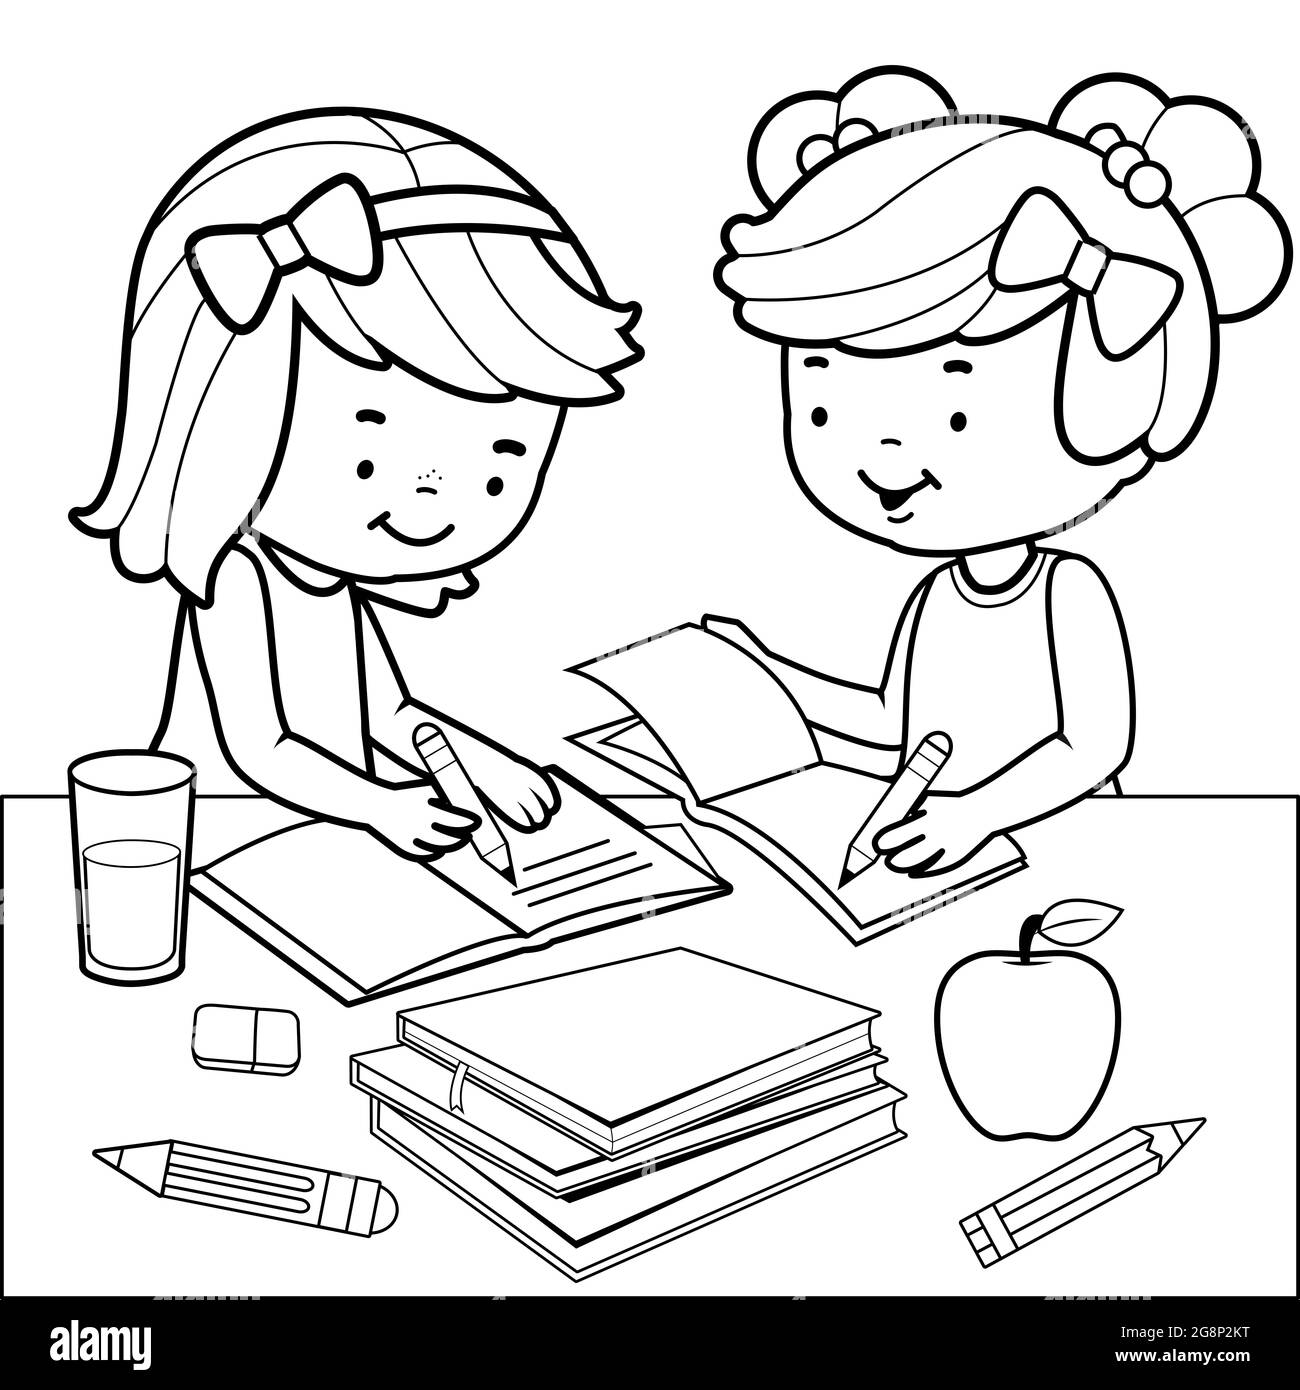 Students doing homework. Black and white coloring page. Stock Photo